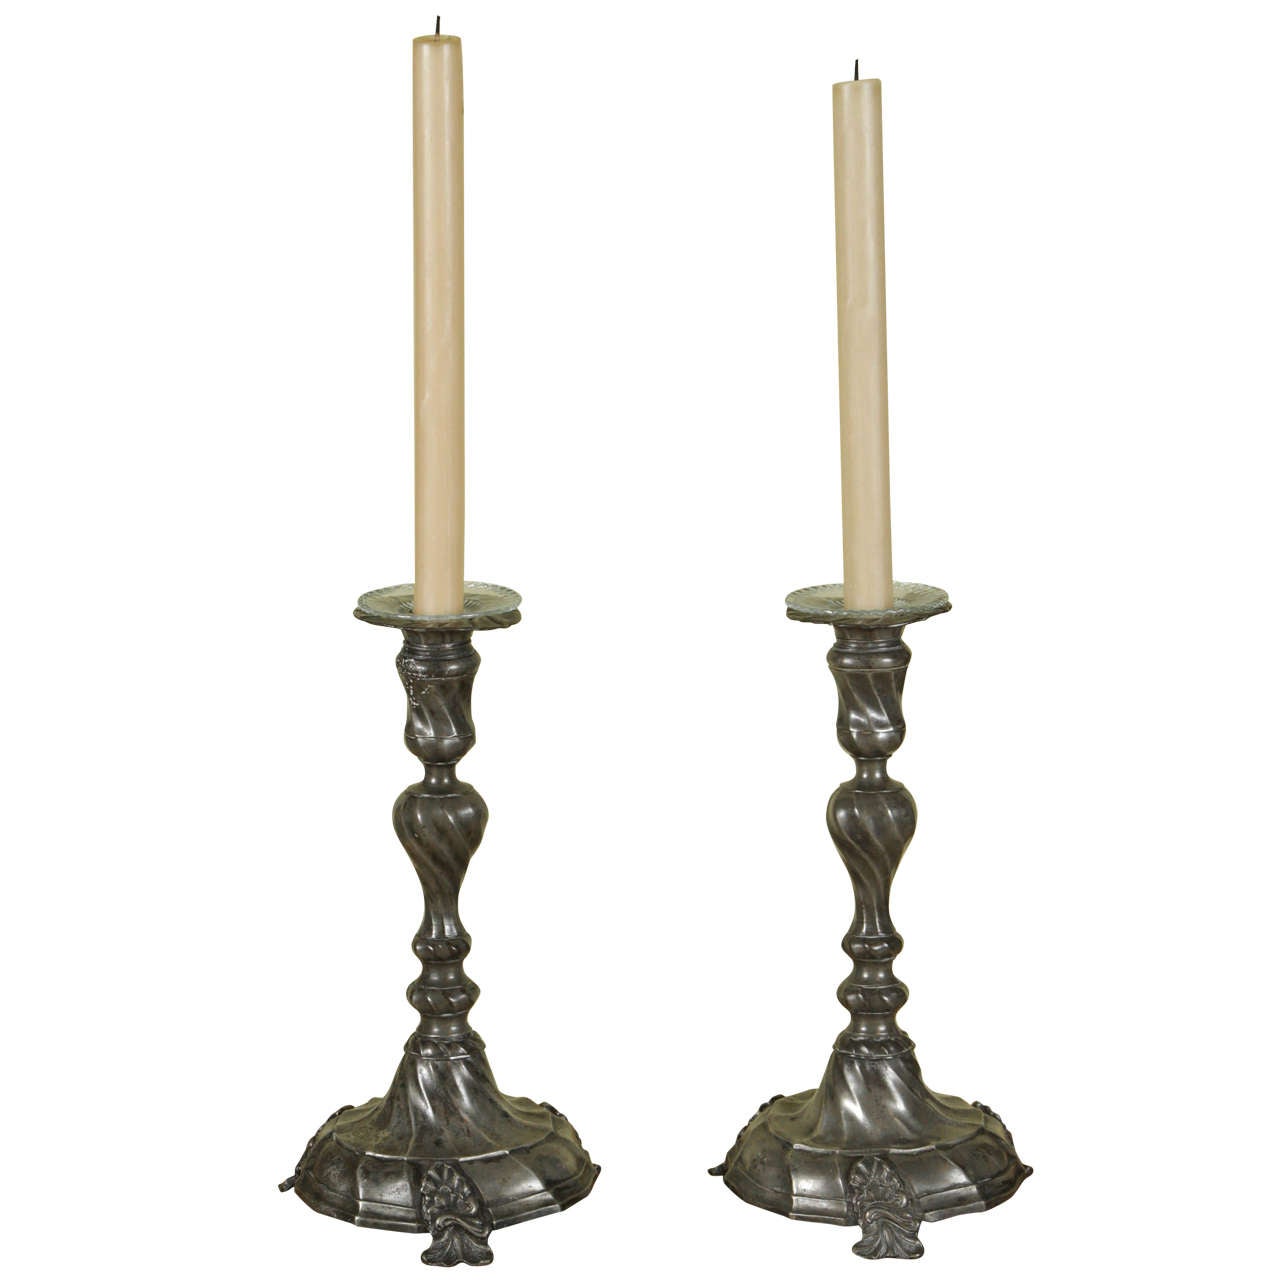 Pair of French Pewter Candlesticks, circa 1740